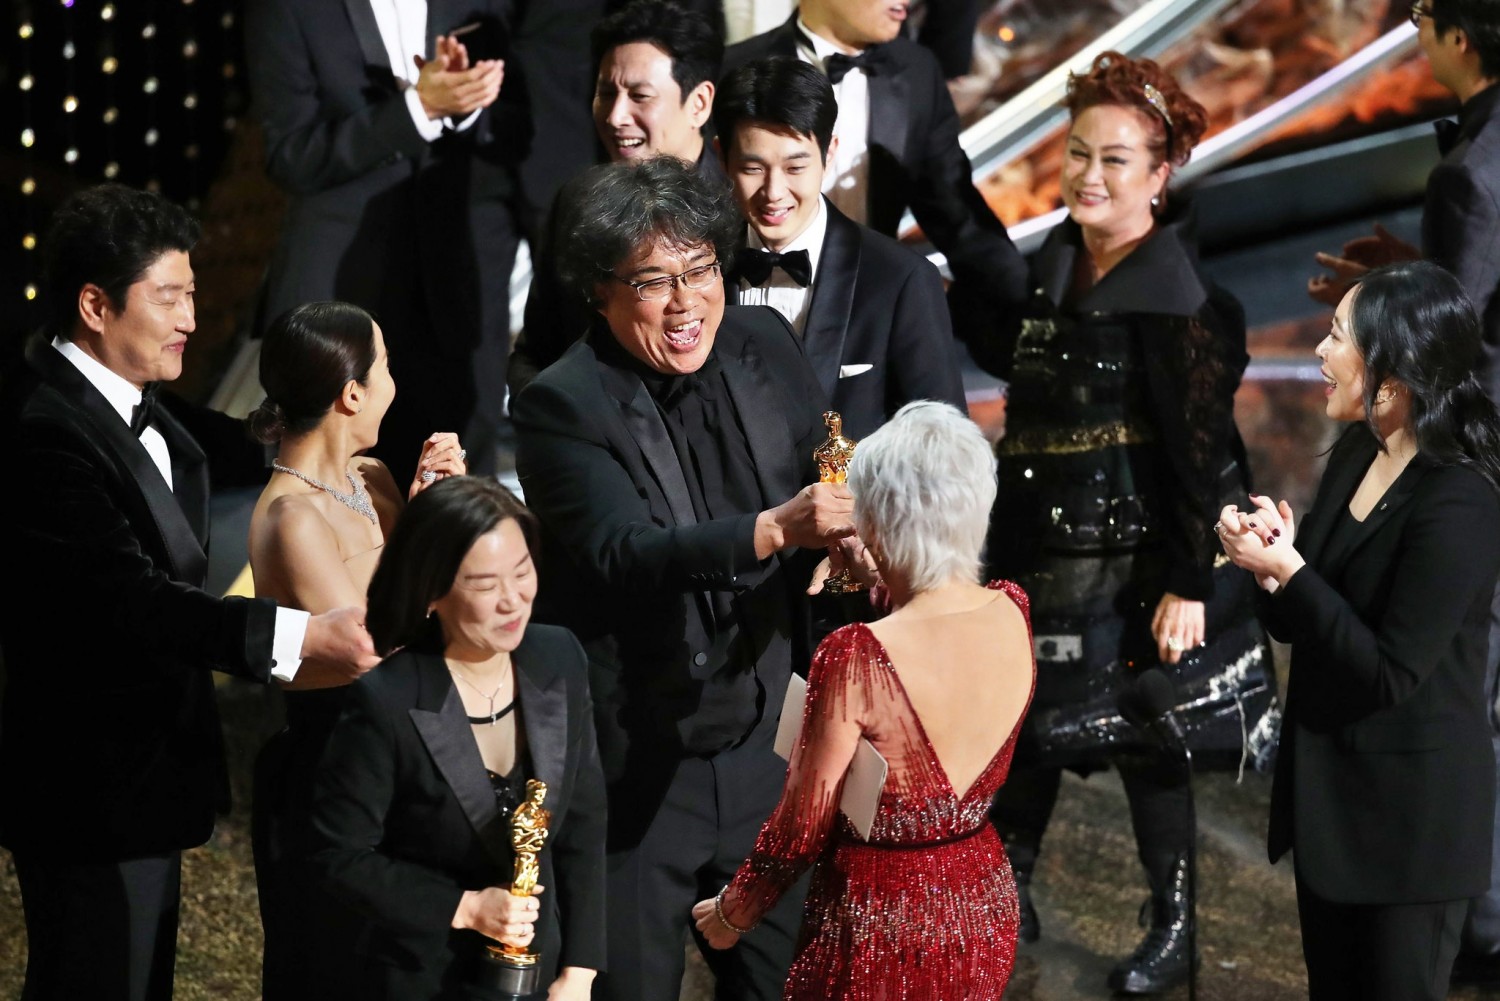 The producer Kwak Sin Ae and director Bong Joon Ho with their Oscars for best picture for “Parasite.”Credit...Noel West for The New York Times